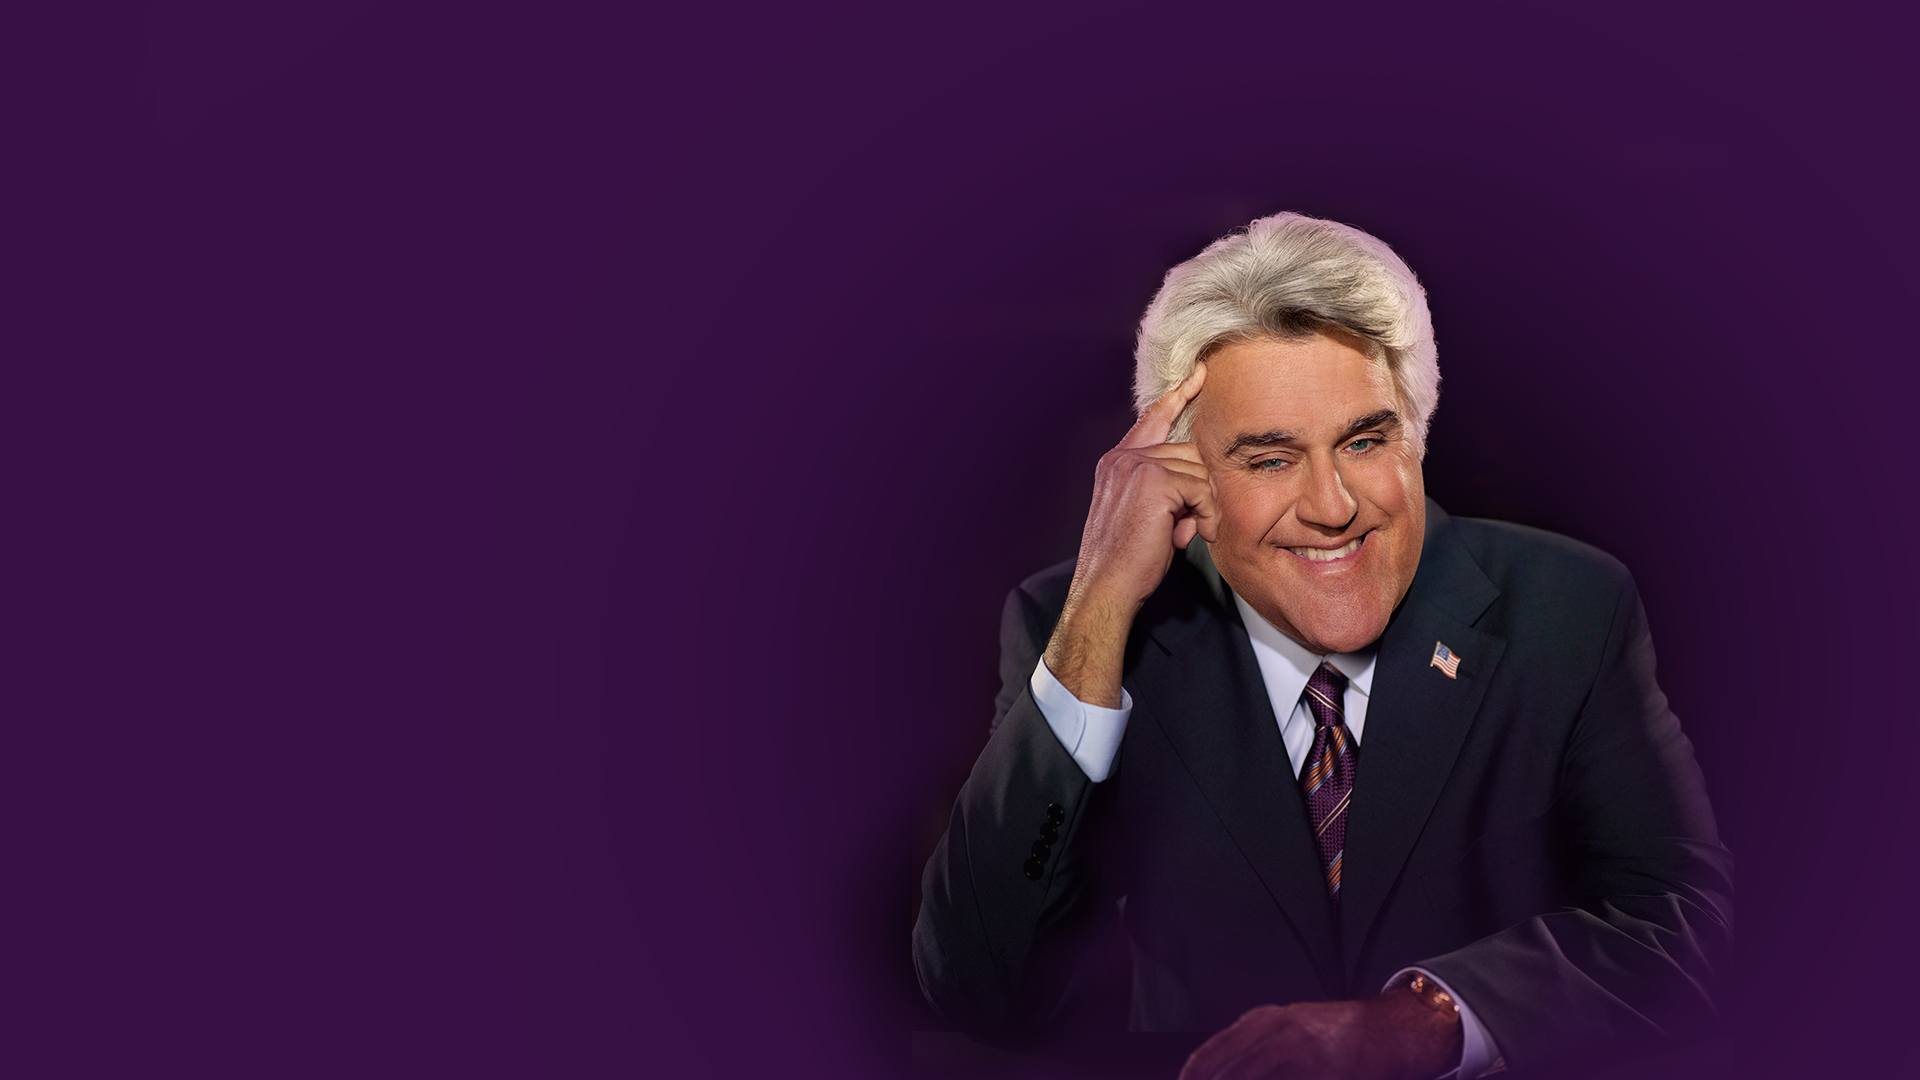 Jay Leno pointing to his temple and smiling. Background is deep purple